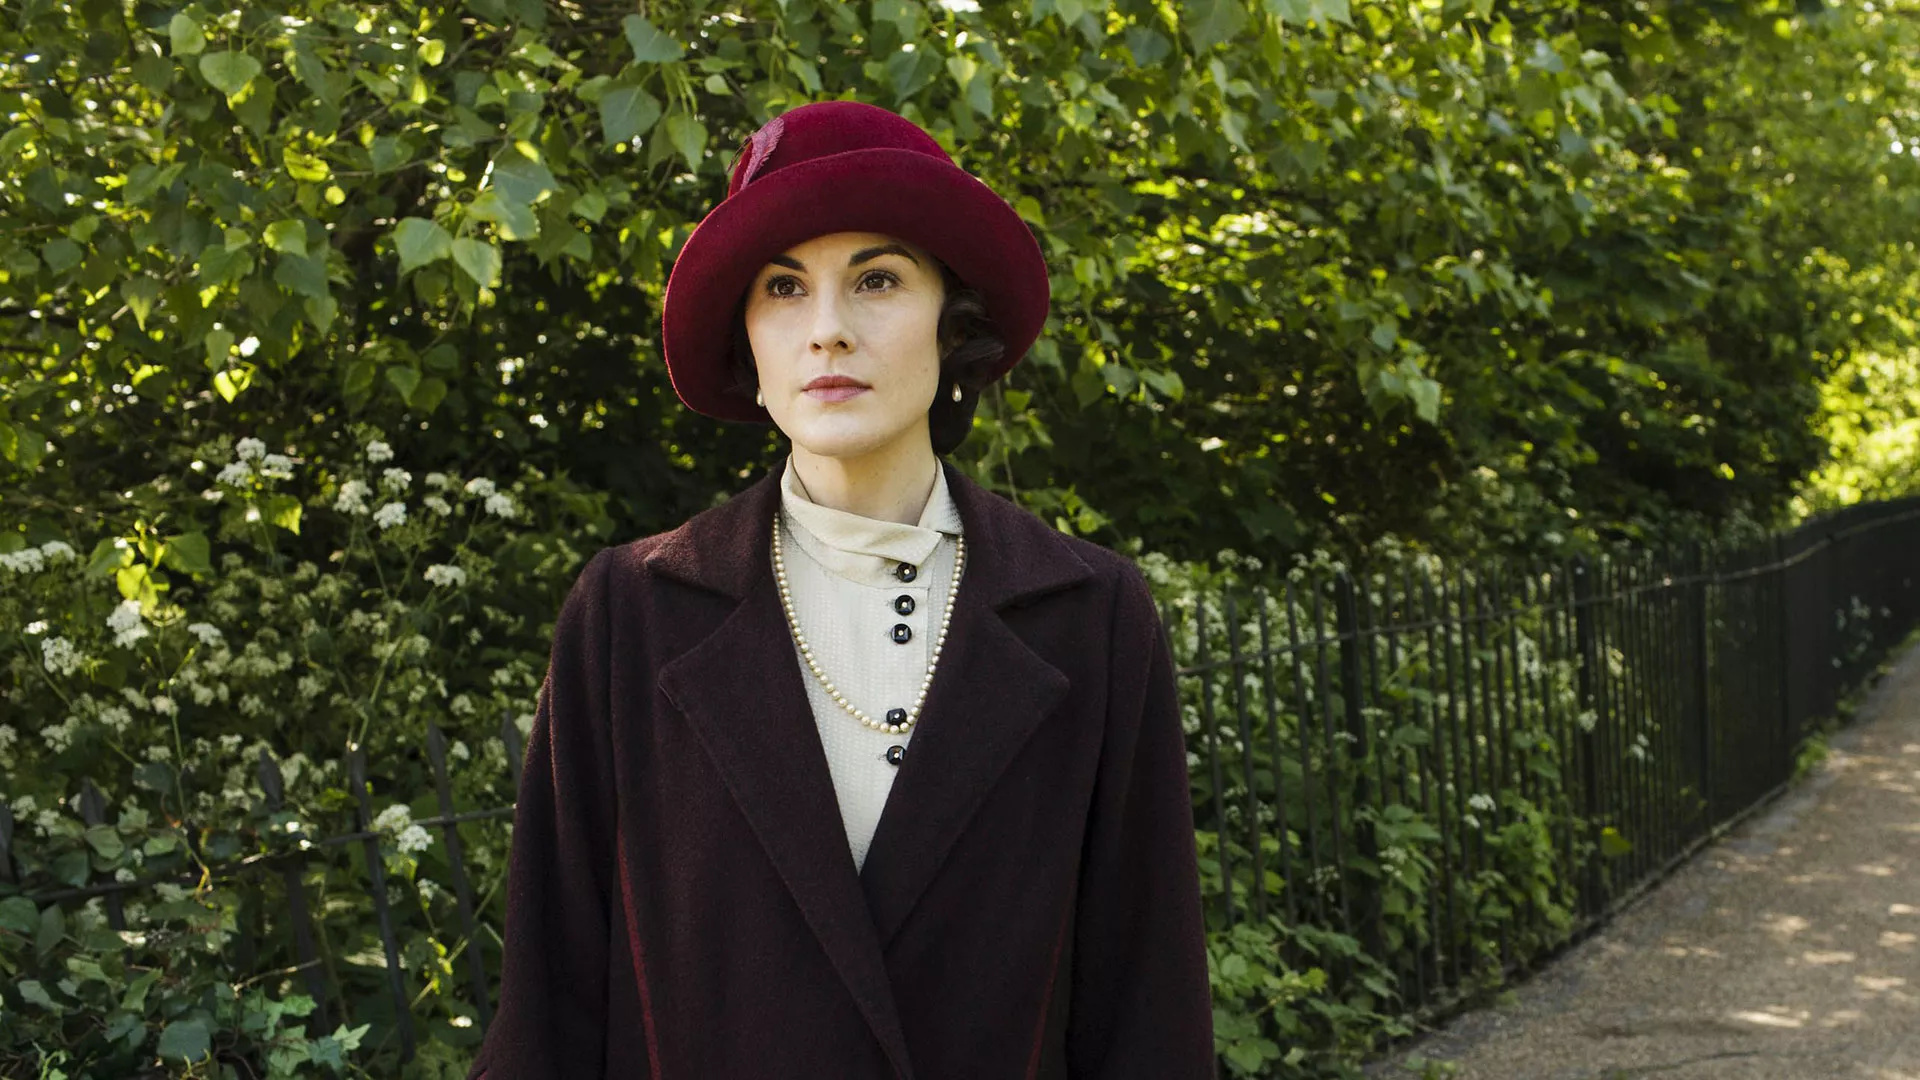 Michelle Dockery: Lady Mary Josephine Crawley, The eldest daughter of Lord and Lady Grantham, Downton Abbey. 1920x1080 Full HD Background.